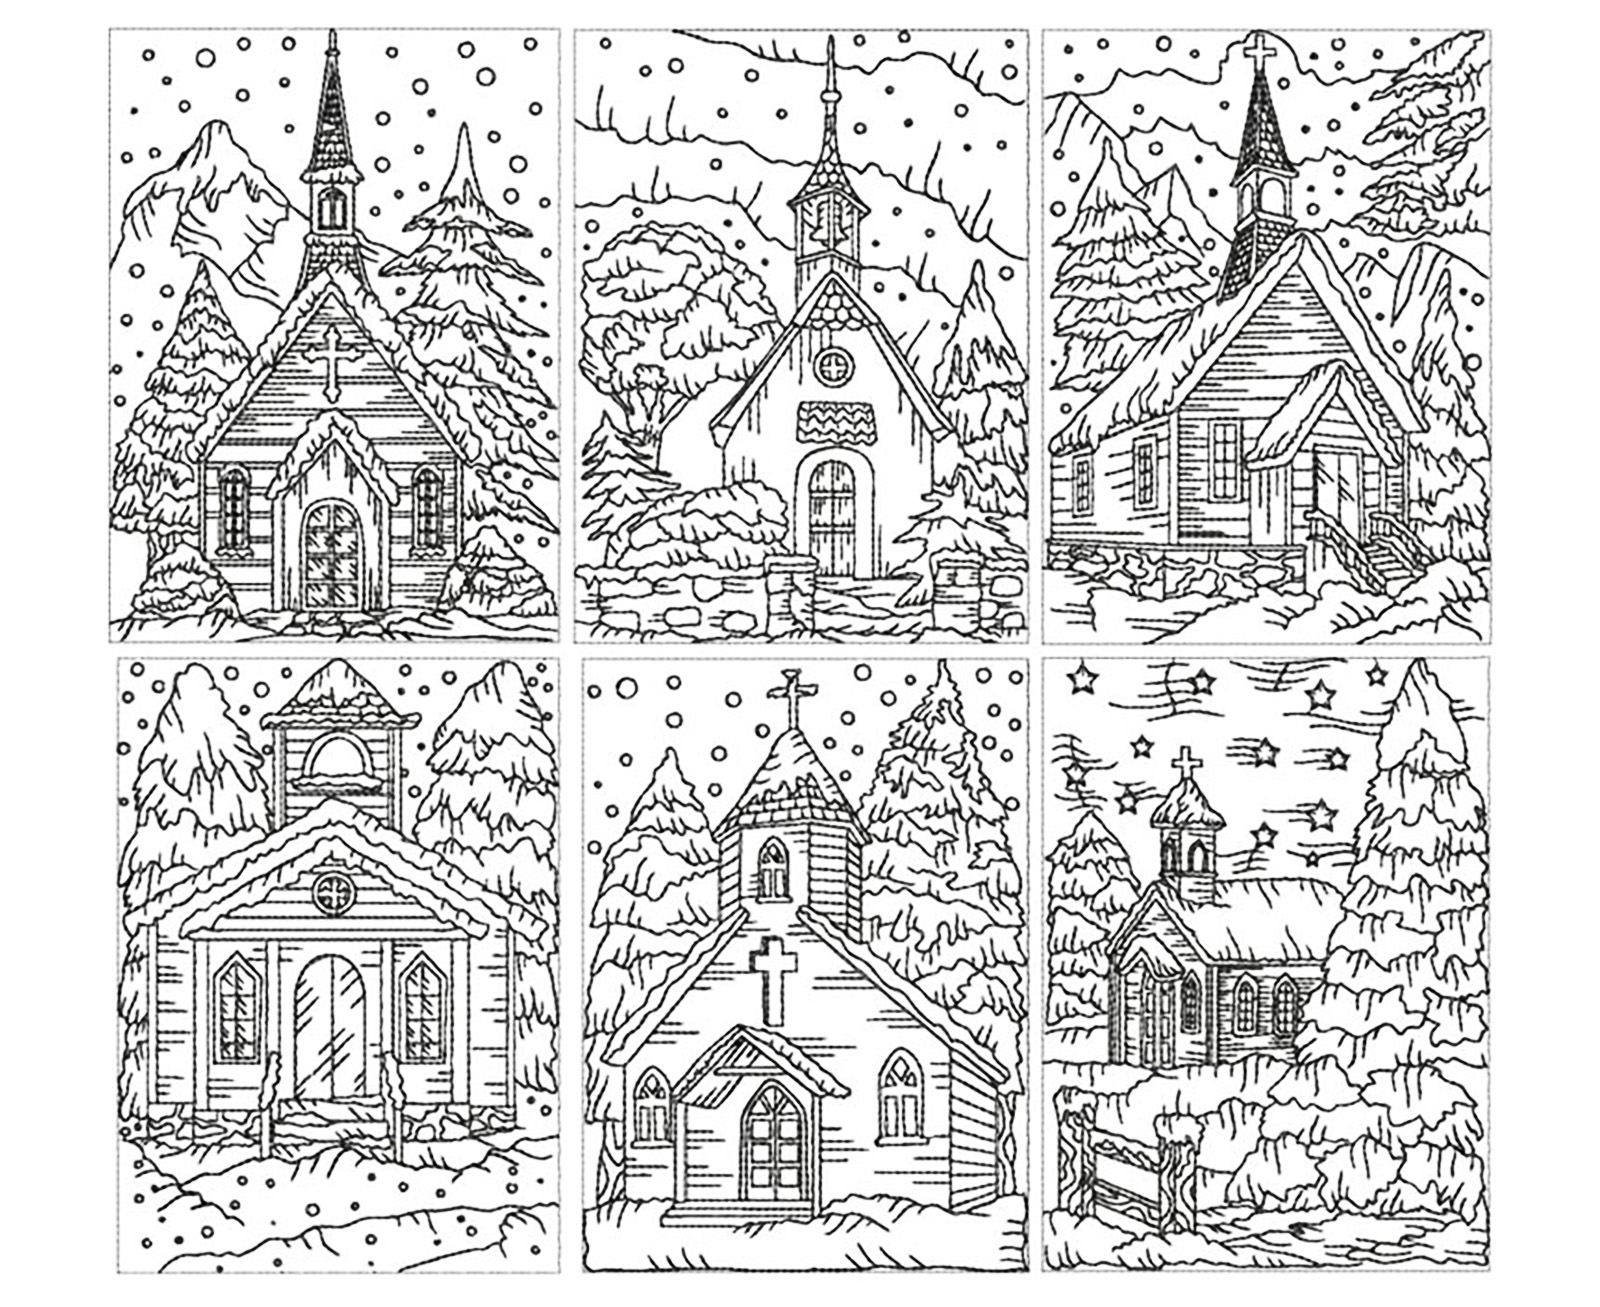 6 drawings of cute churches under the snow